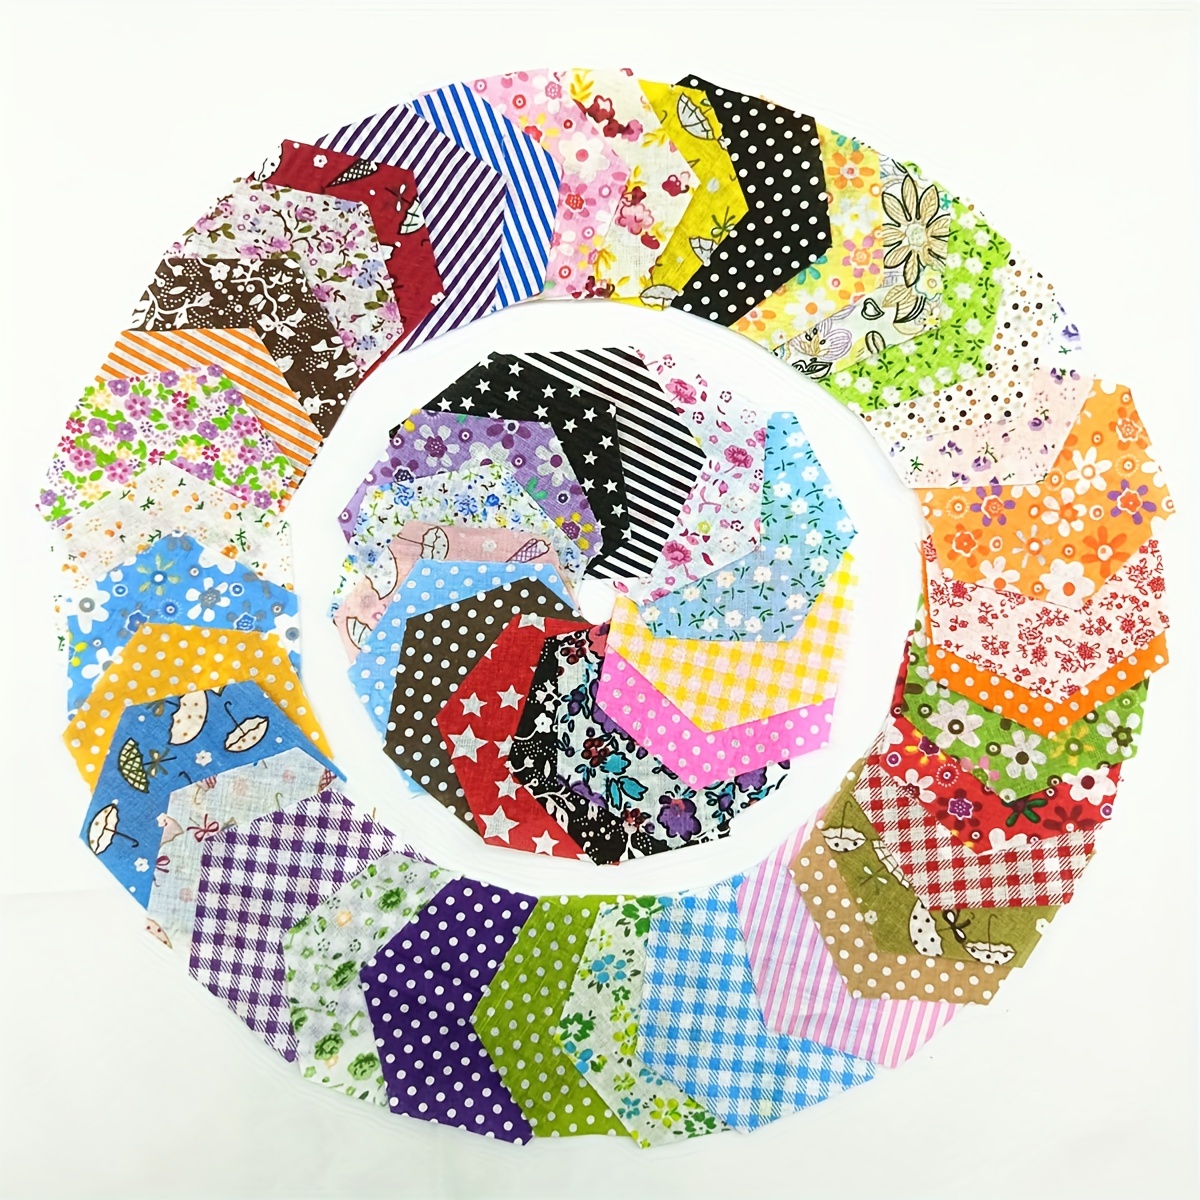 

50/100-piece Assorted Hexagon Cotton Patchwork Fabrics For Quilting And Crafting - Pre-cut Floral Designs, Ideal For Diy Projects